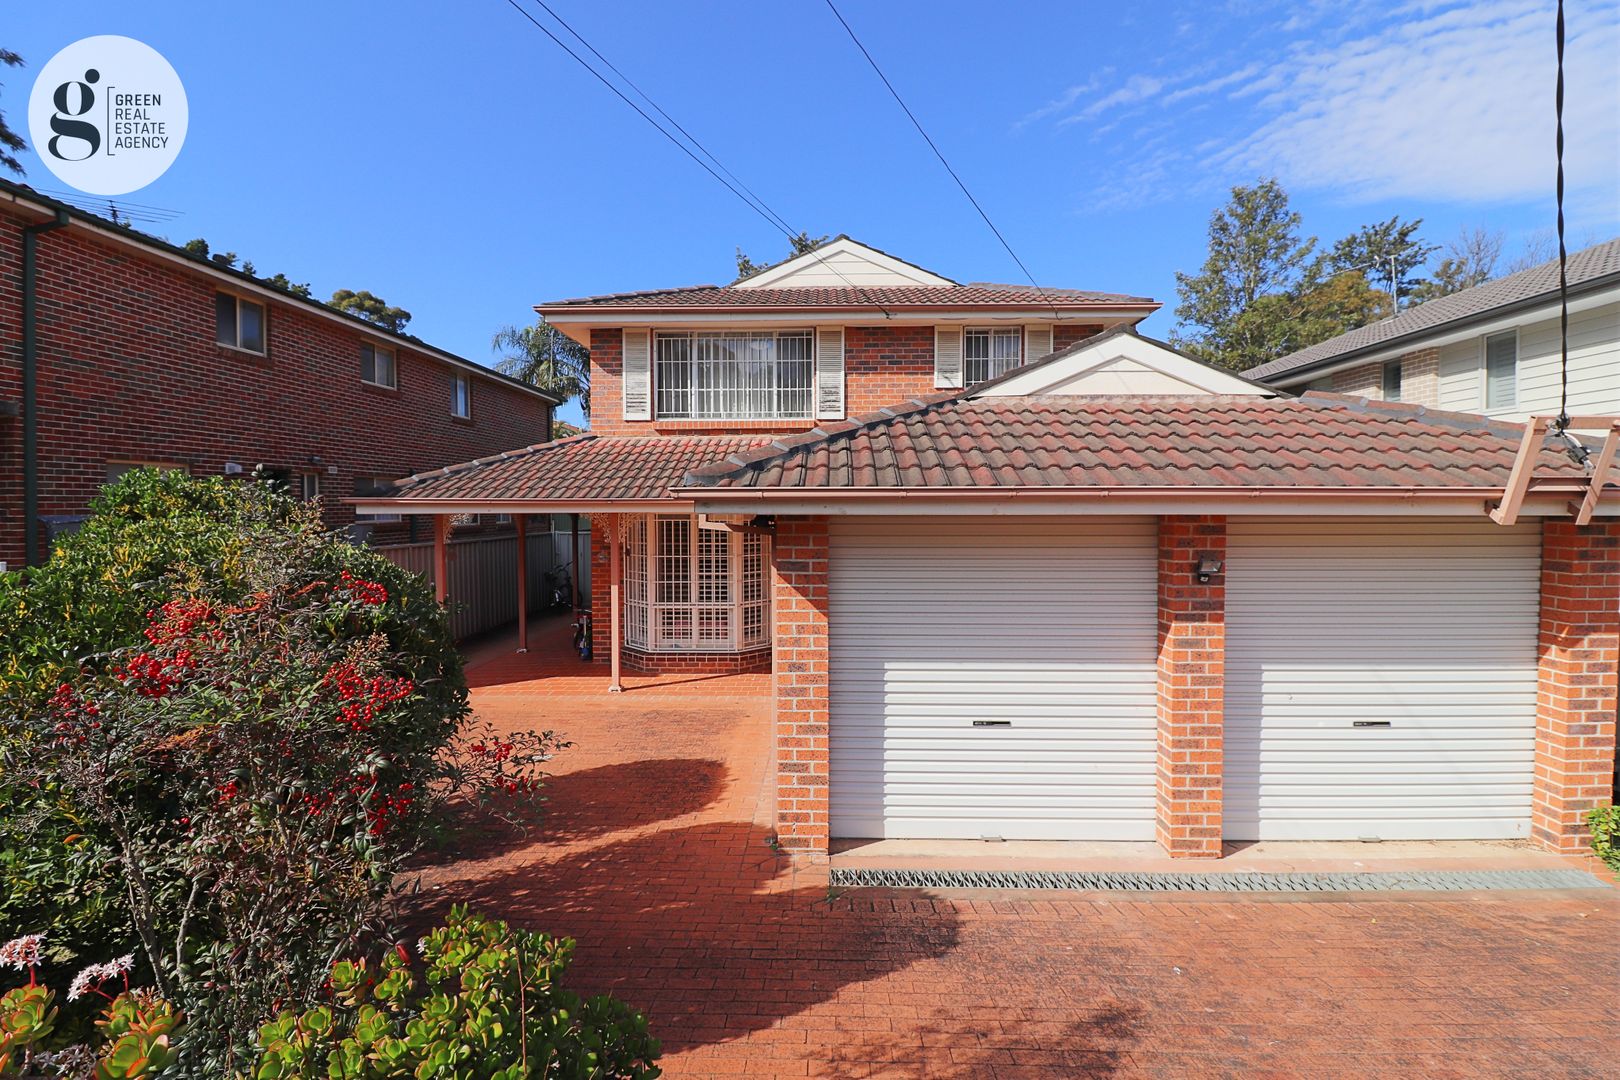 4 bedrooms House in 6 Forster Street WEST RYDE NSW, 2114